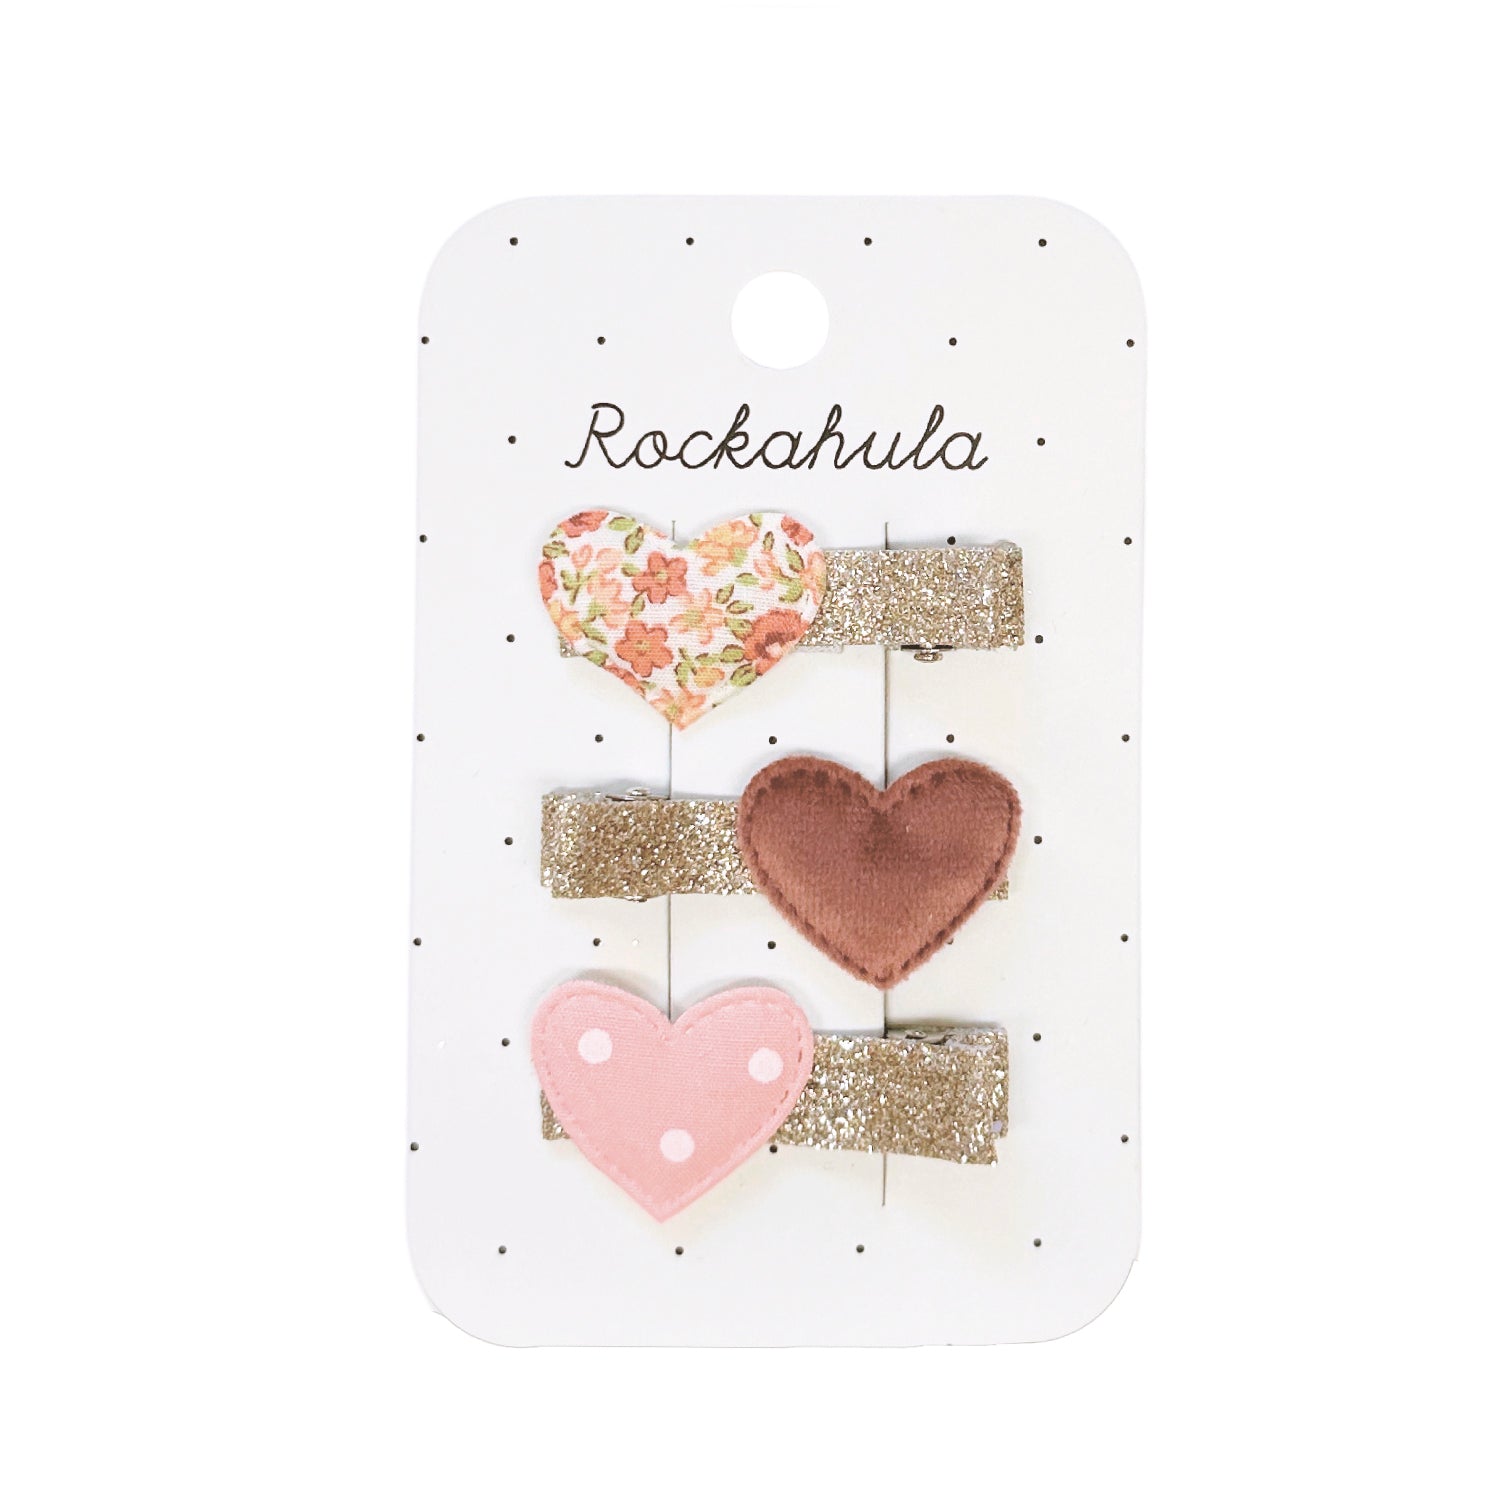 rockahula heart bar hair clips / Feel the love with this sweet set of heart bar clips in this neutral colour palette. Featuring three hearts in floral print, a spotty pink fabric and dusky velvet!